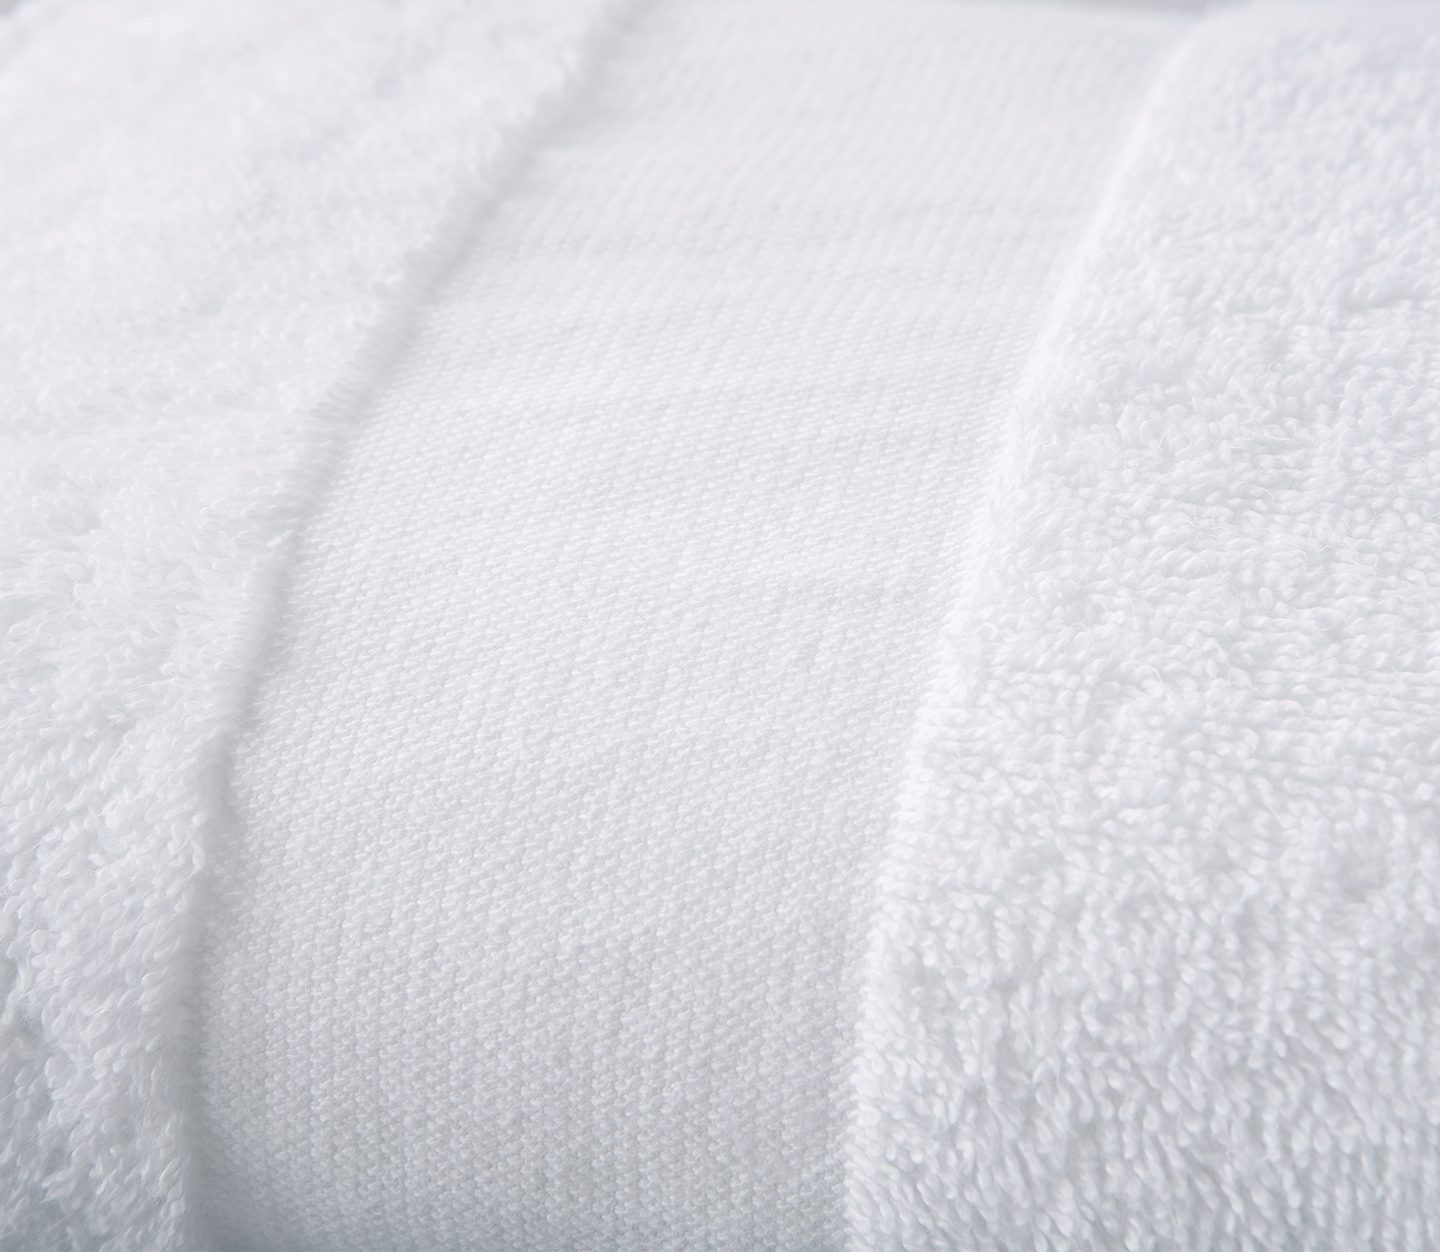 How to Wash Towels: 15 Expert Tips for Prolonged Softness